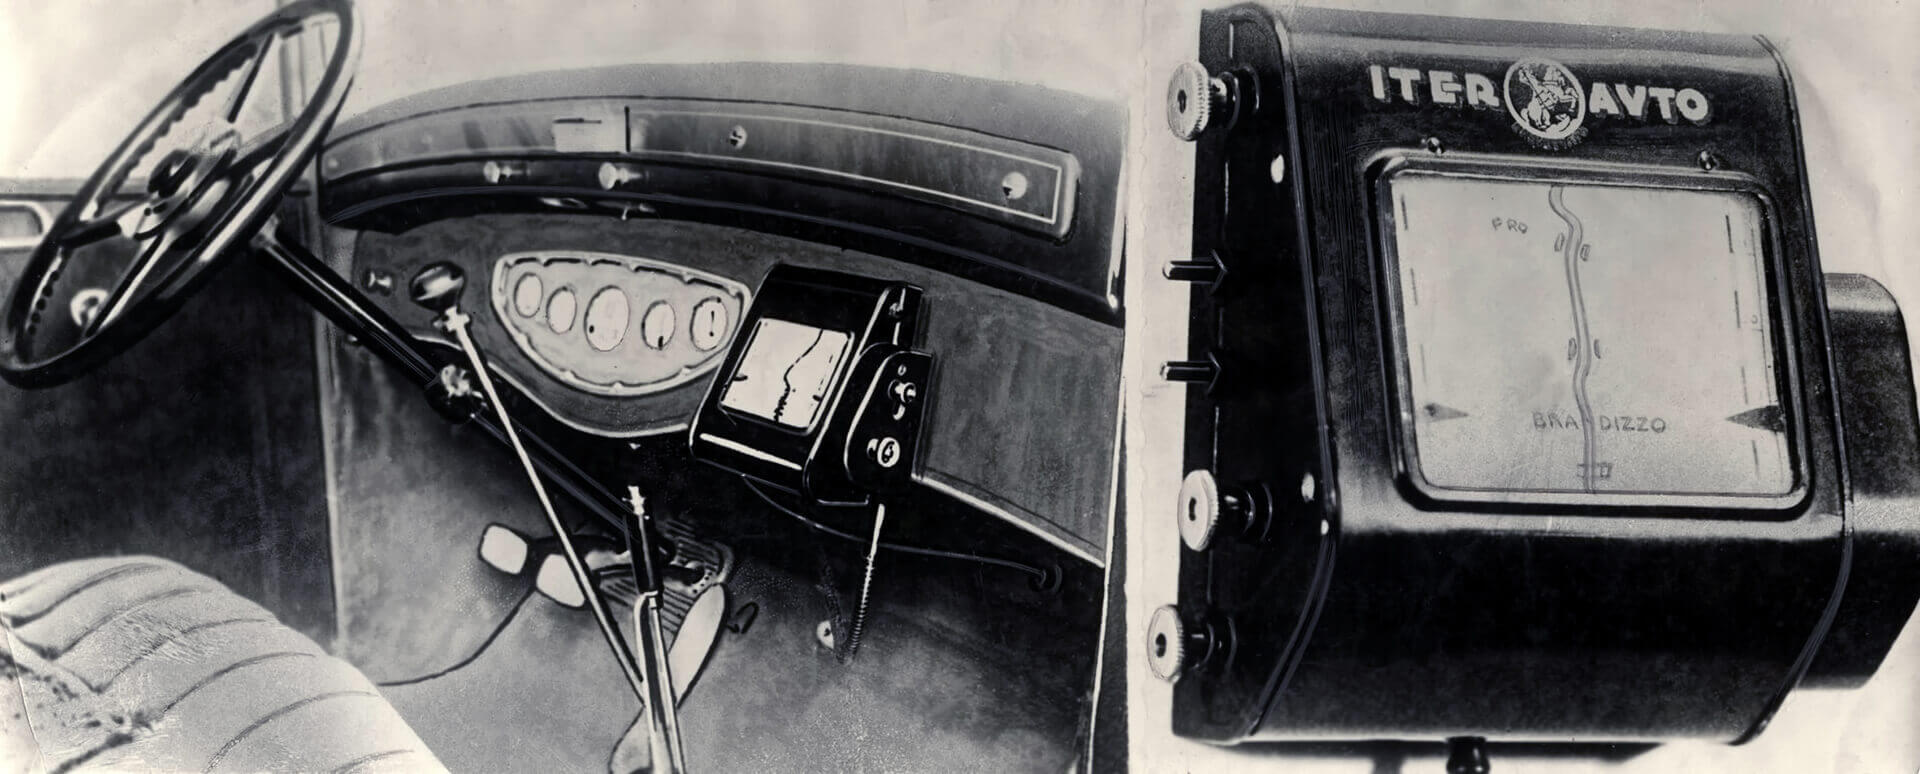 A Brief History of Car GPS Navigation for Those in Automotive School